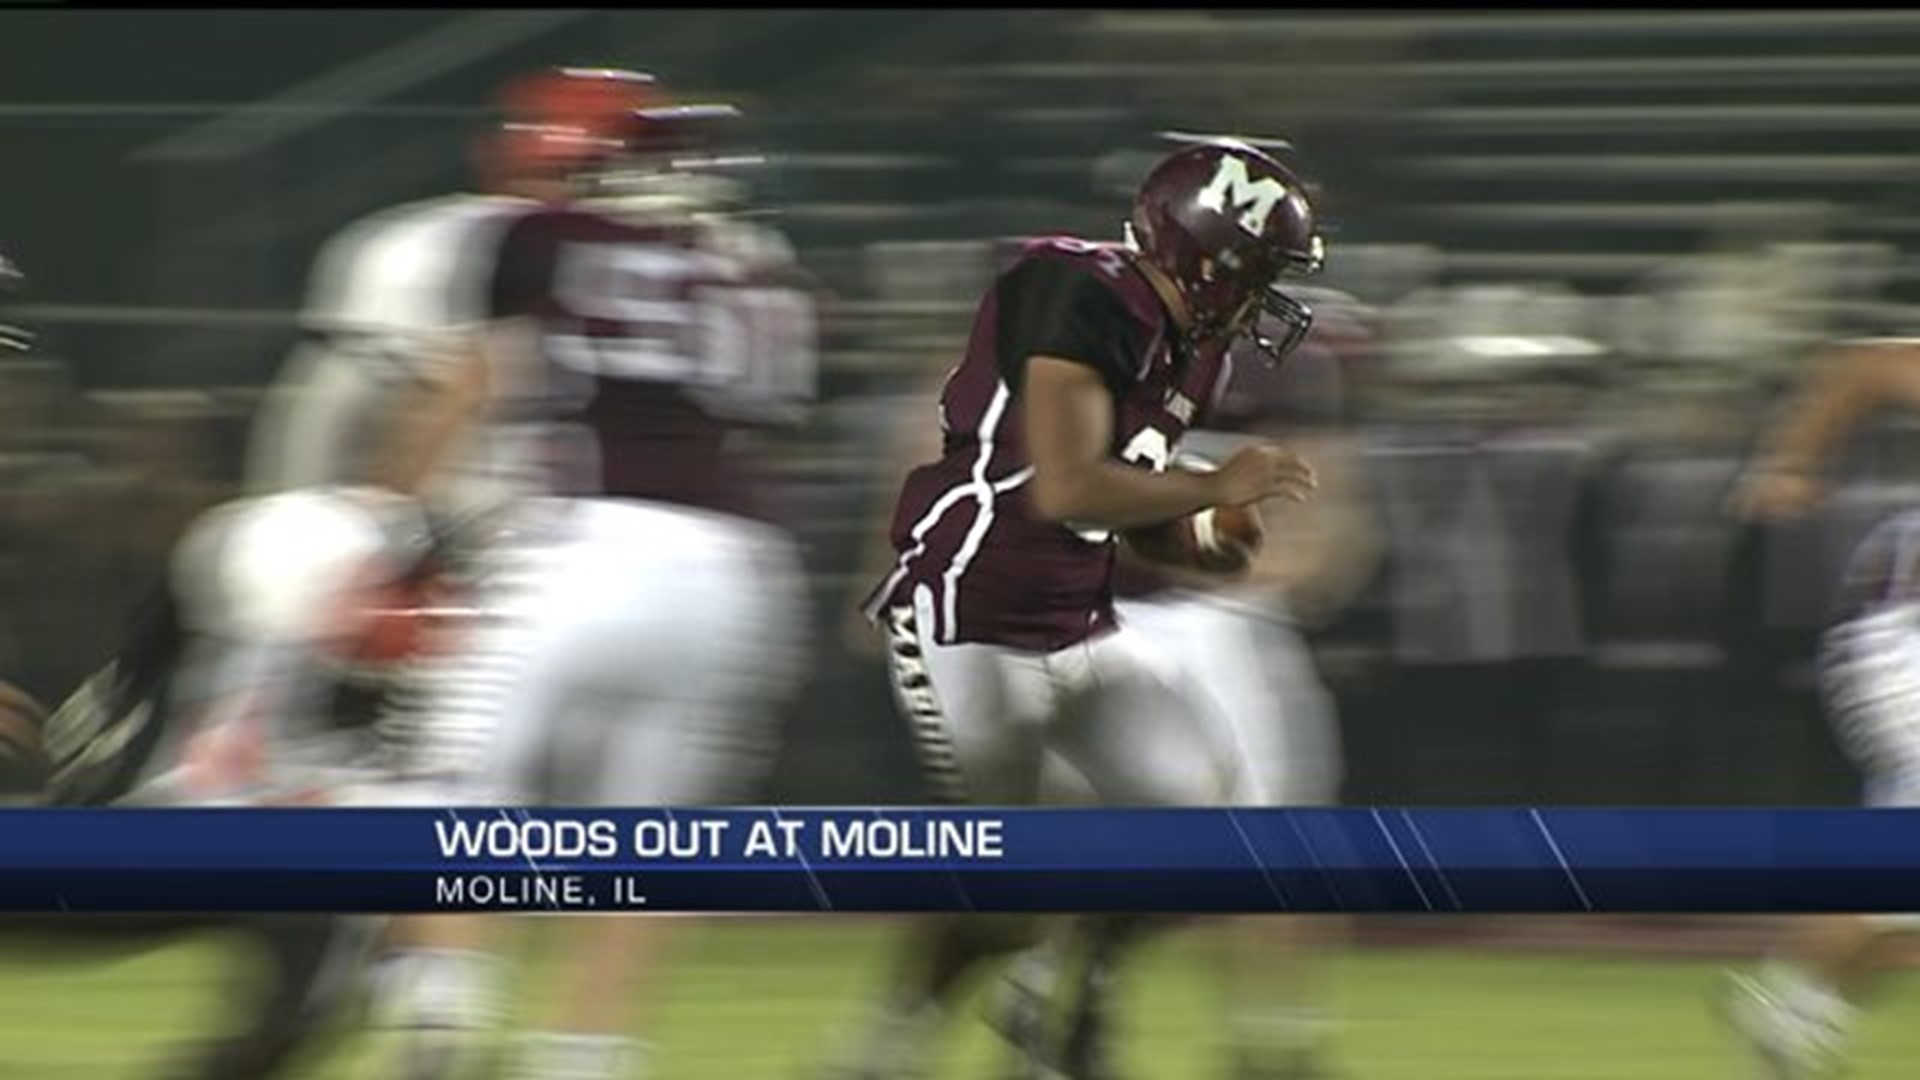 Woods out at Moline